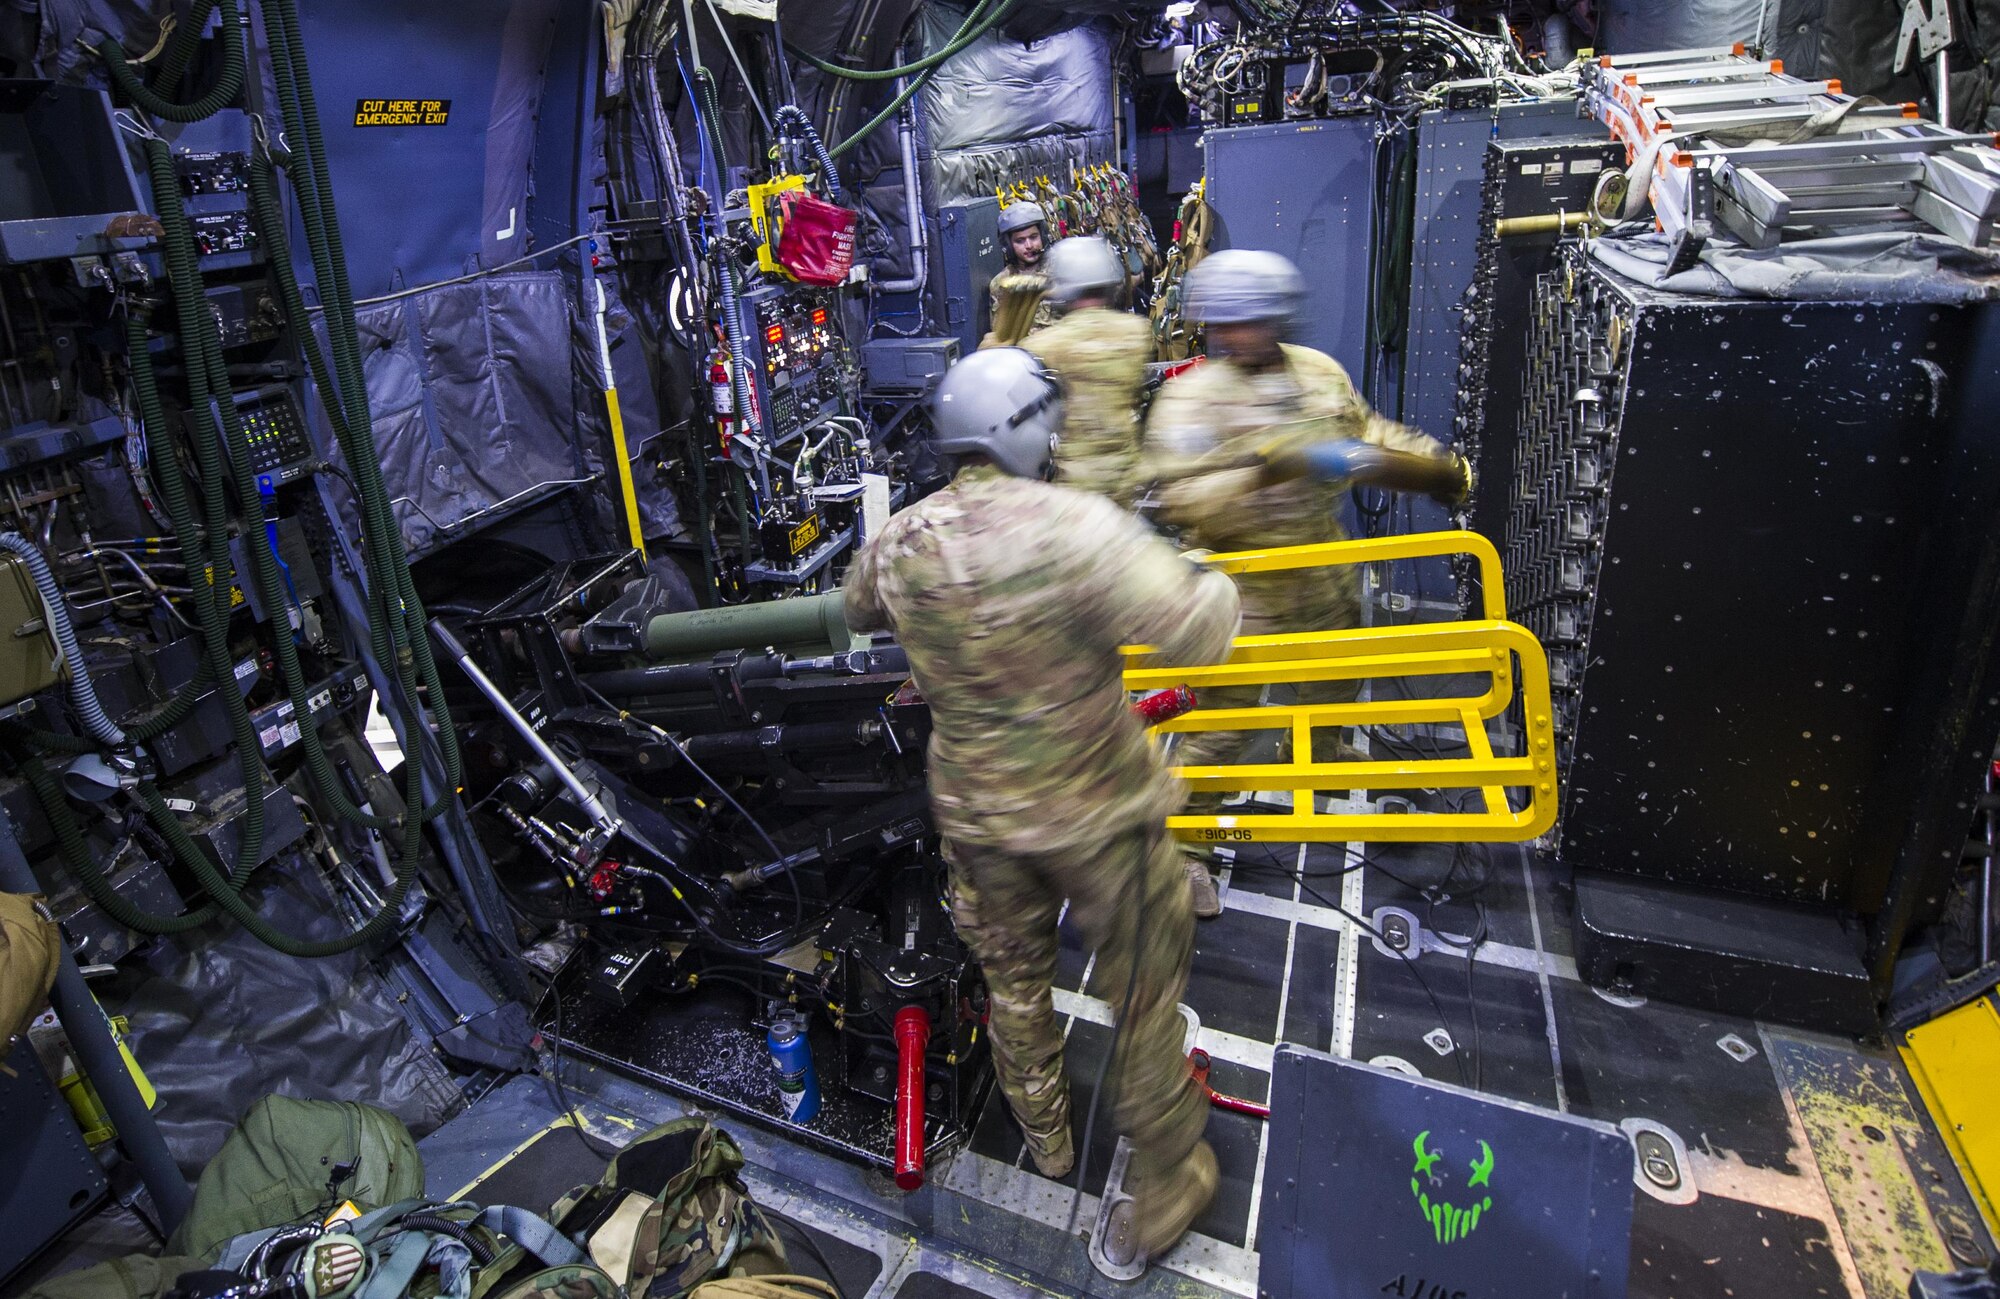 Special missions aviators with the 4th Special Operations Squadron reload the 105mm and 40mm canons on an AC-130U Spooky gunship during a live-fire training mission at the Eglin Range, Fla., April 17, 2017. The AC-130U gunship’s primary missions are close air support, air interdiction and armed reconnaissance. (U.S. Air Force photo by Airman 1st Class Joseph Pick)